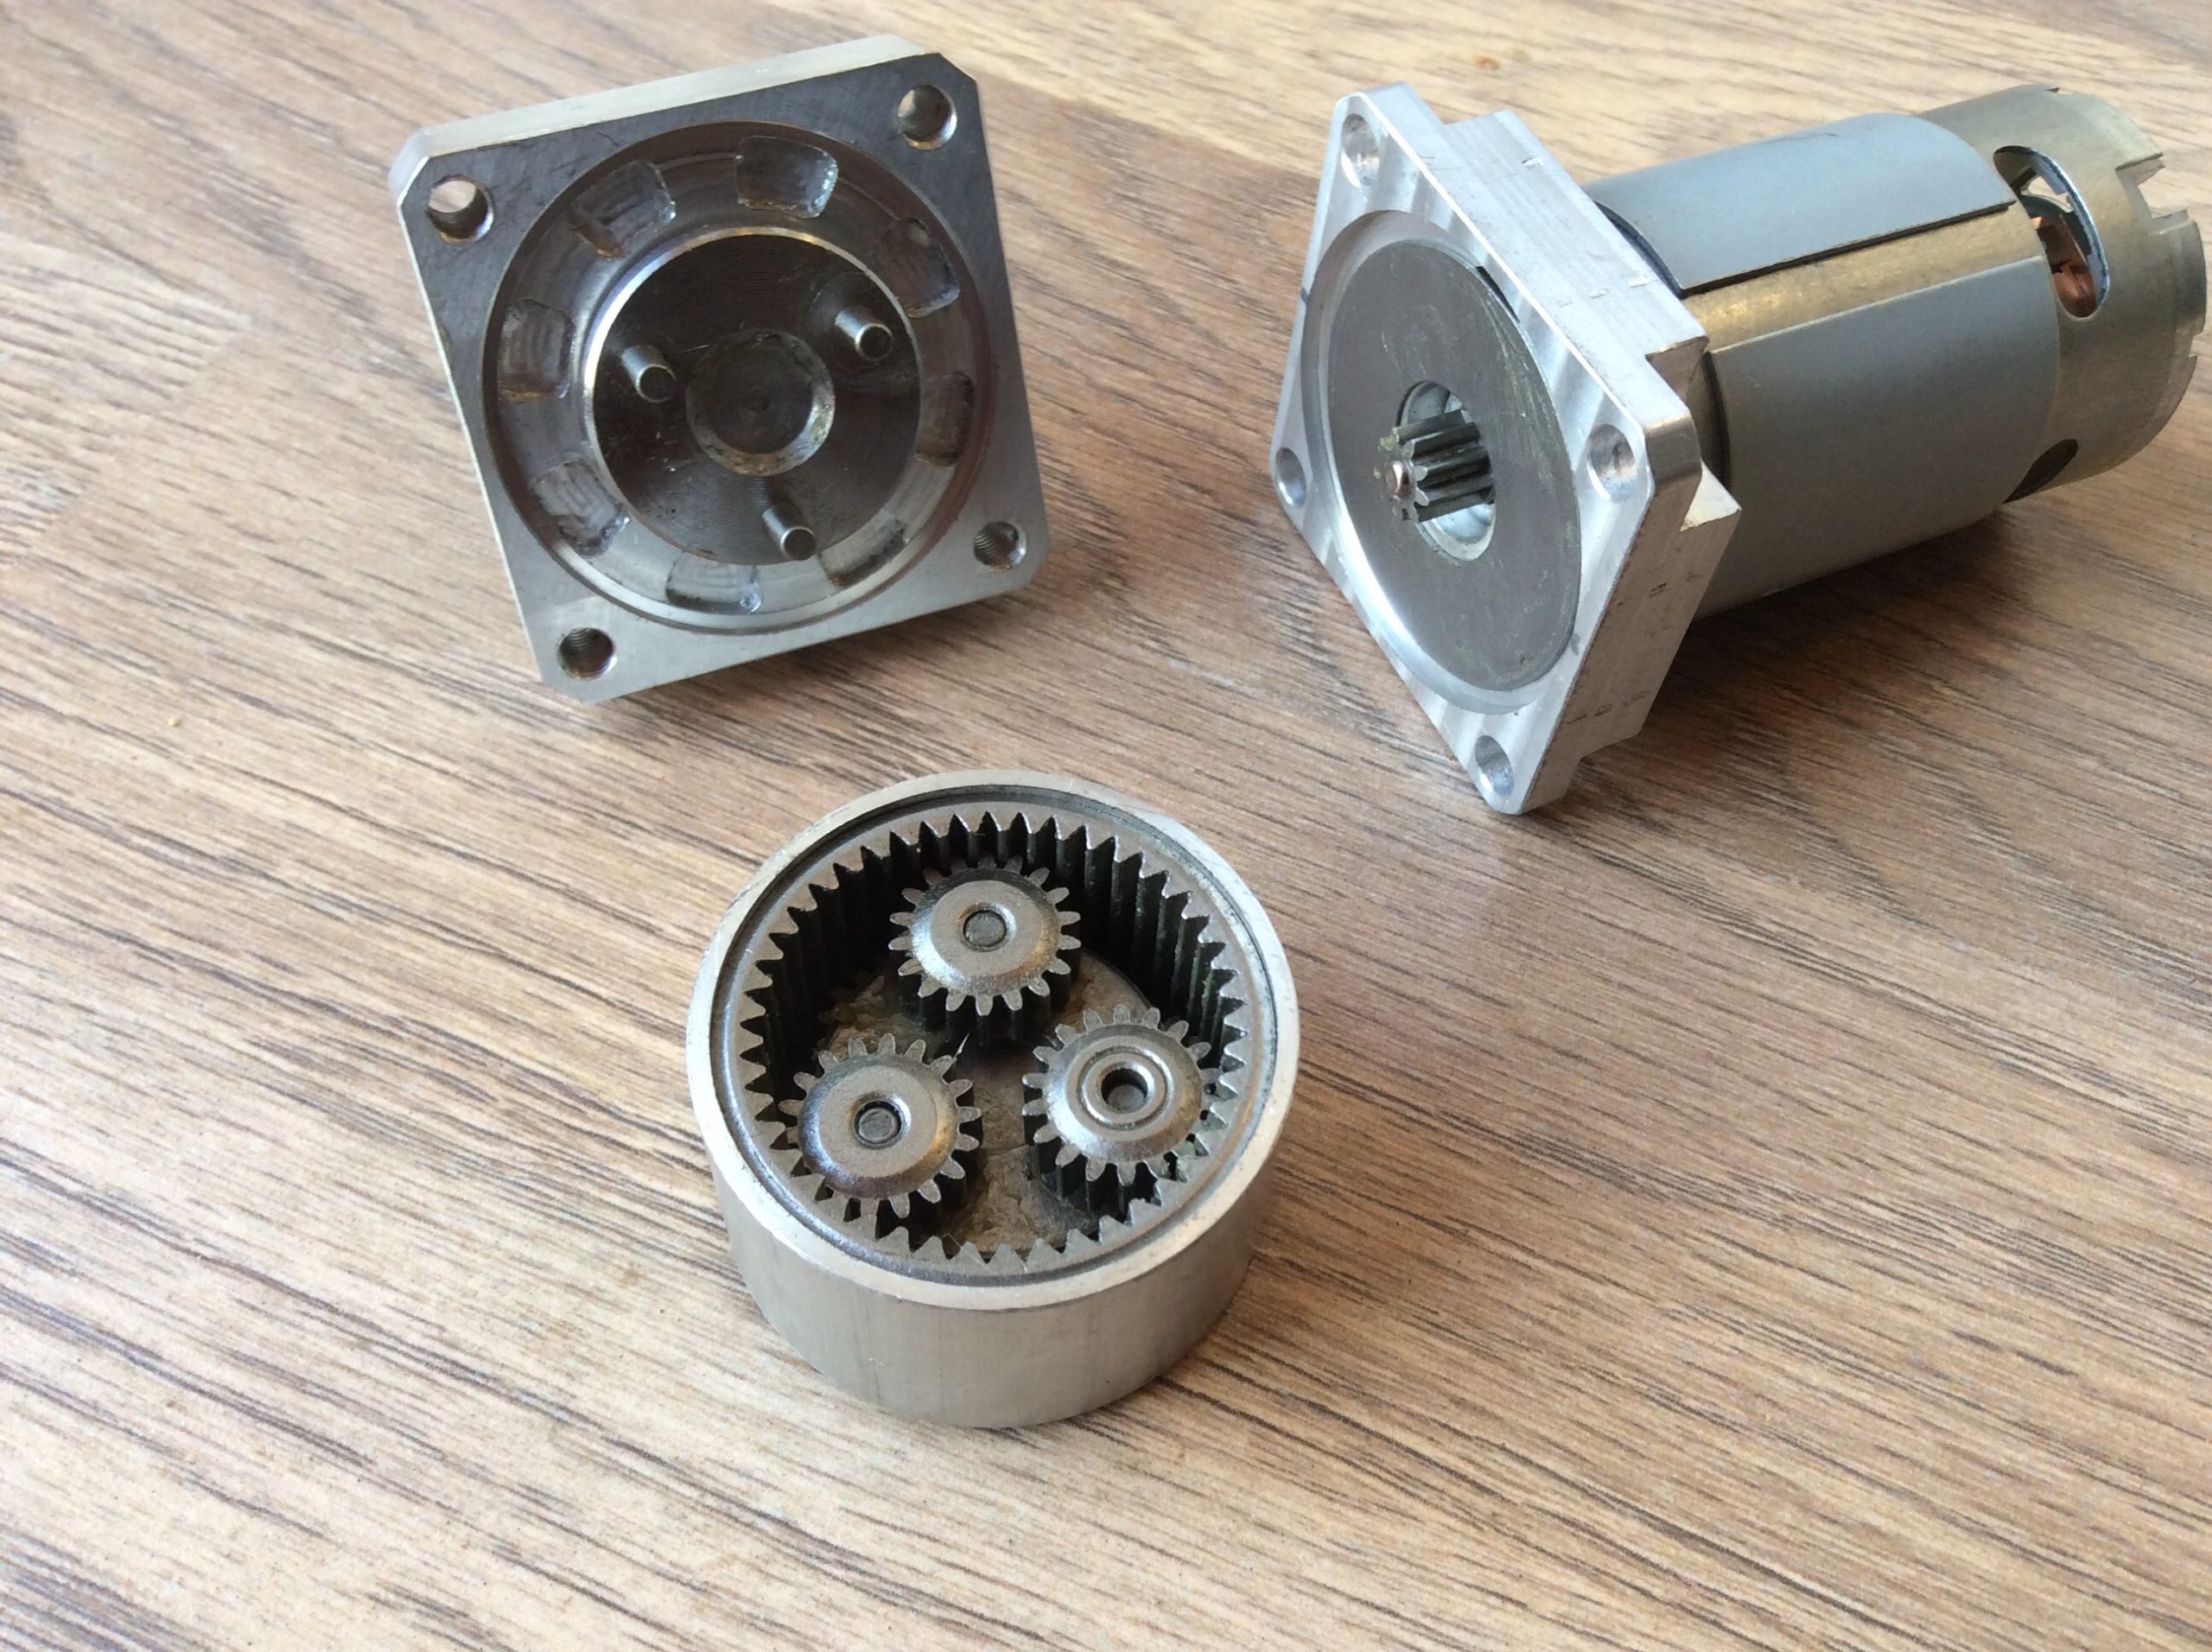 12v all metal gearbox motor assembly – Team SC